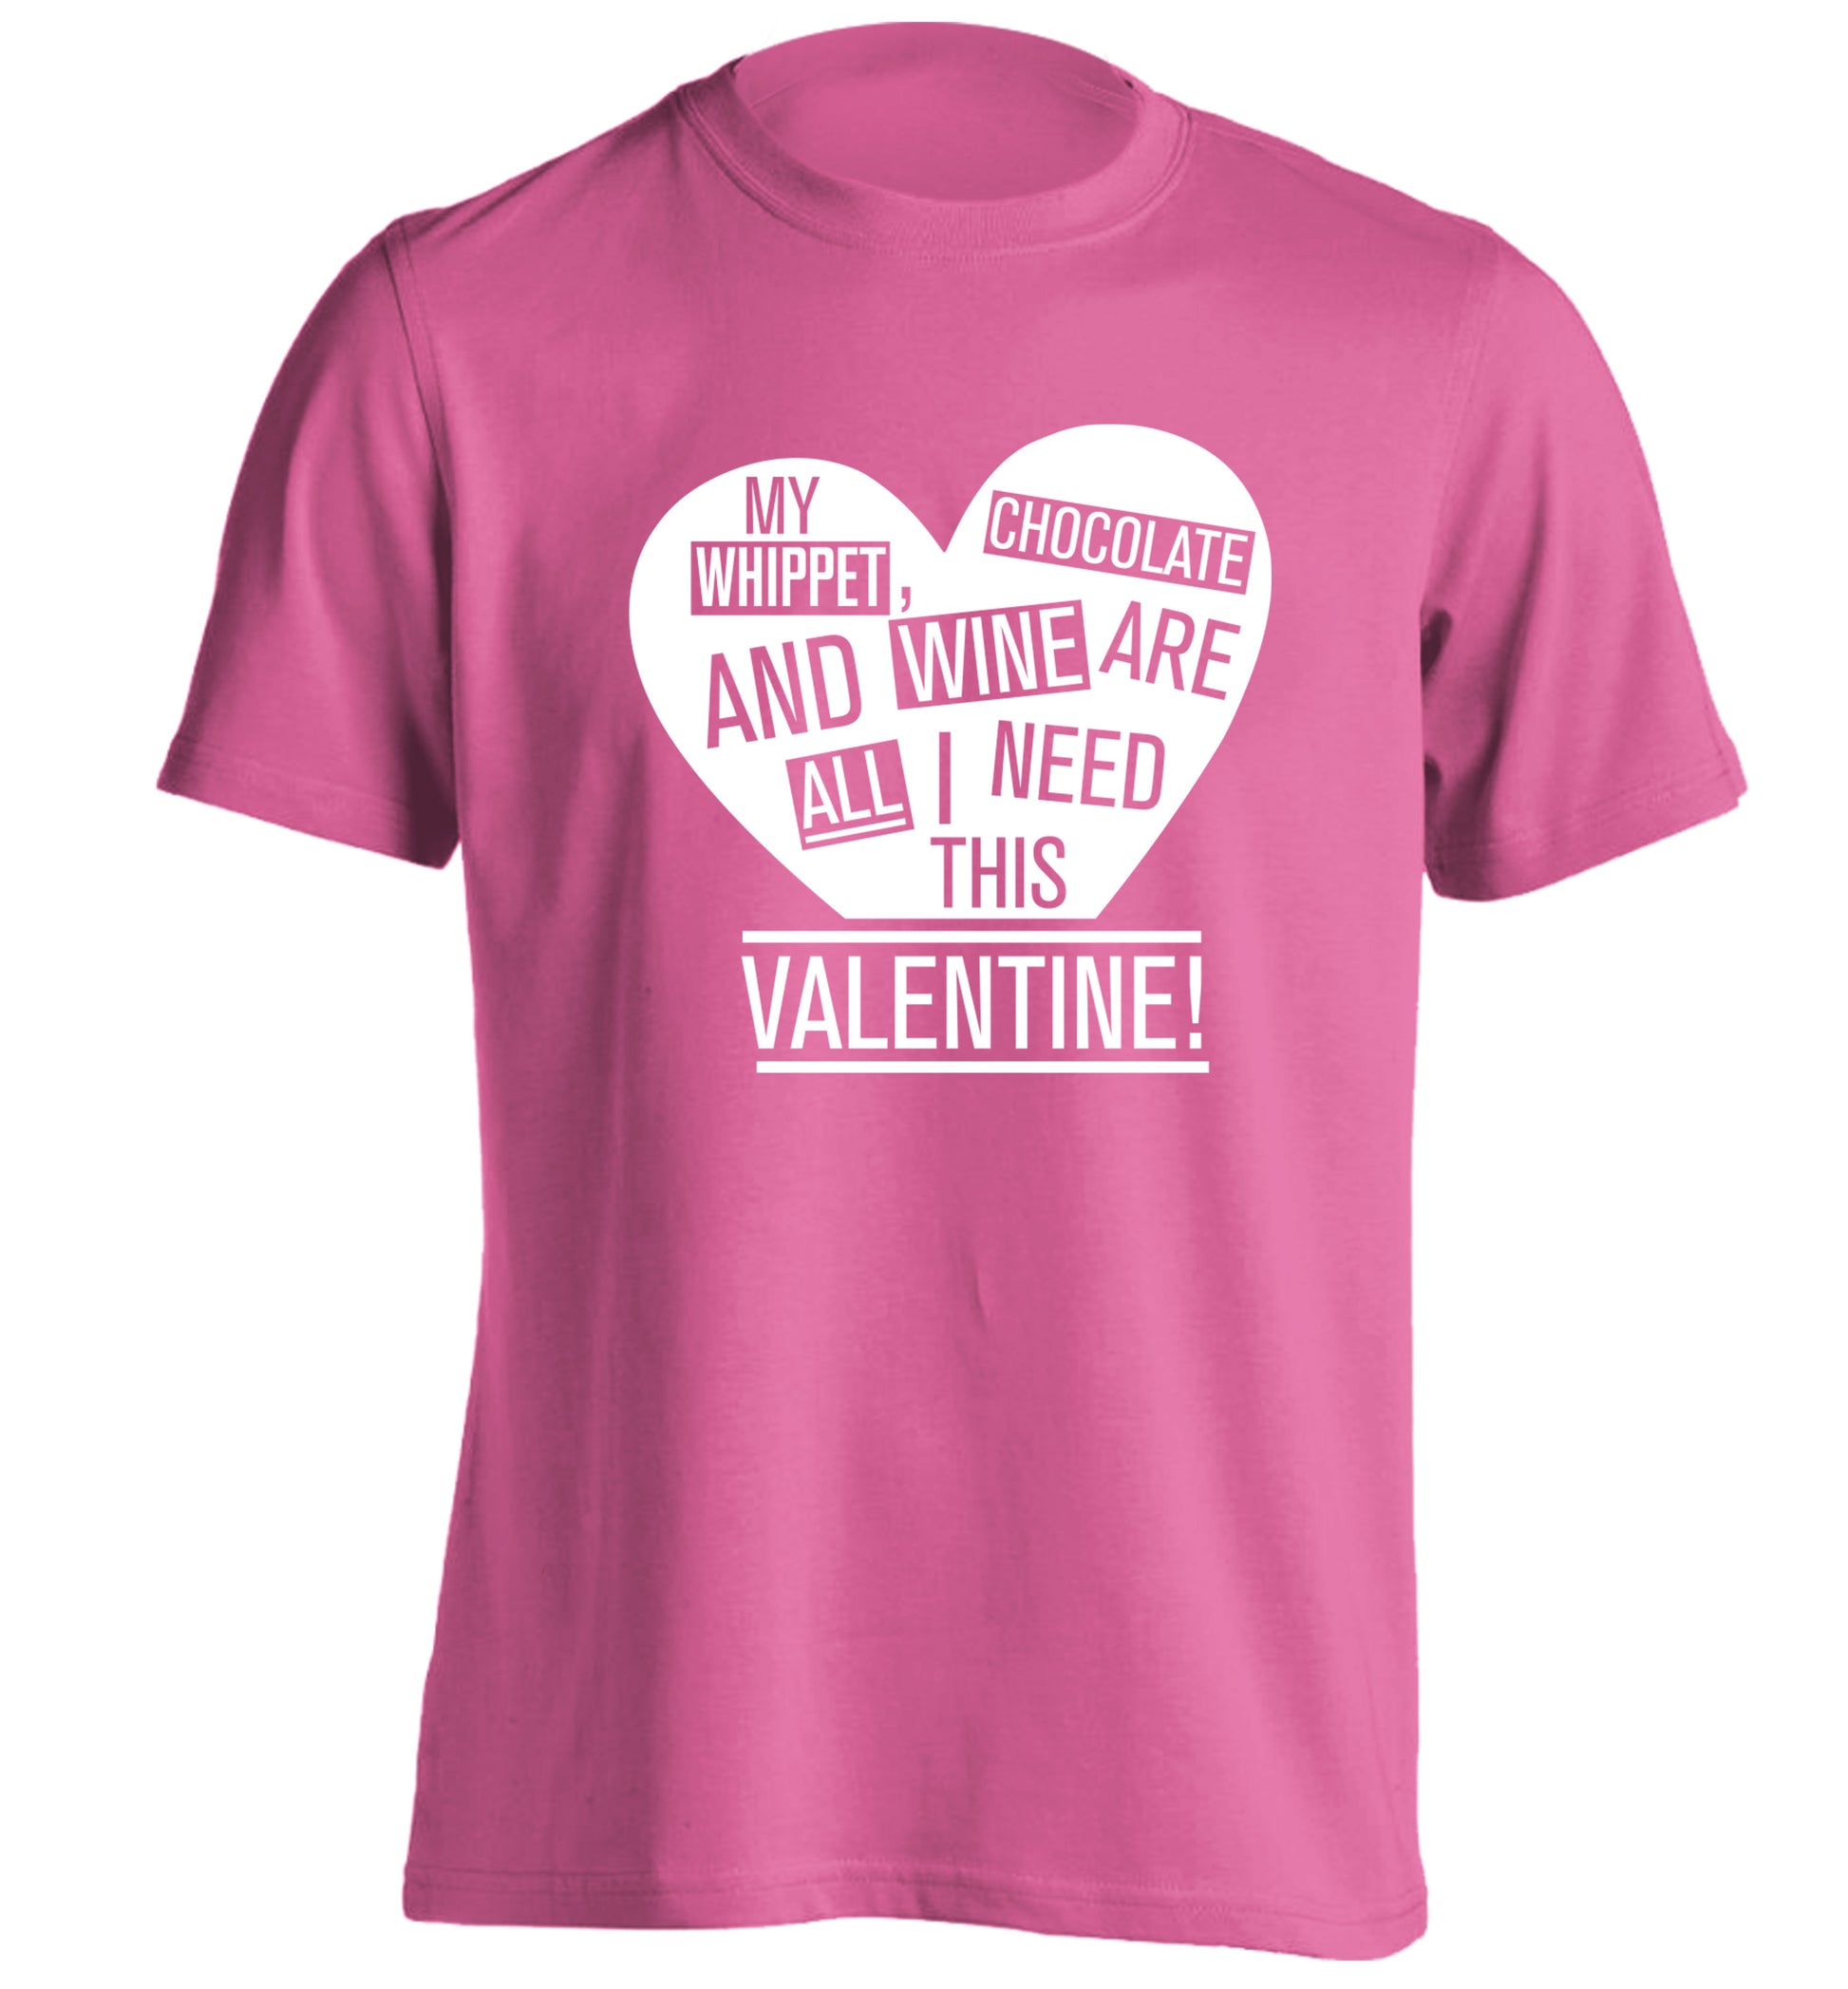 My whippet, chocolate and wine are all I need this valentine! adults unisex pink Tshirt 2XL